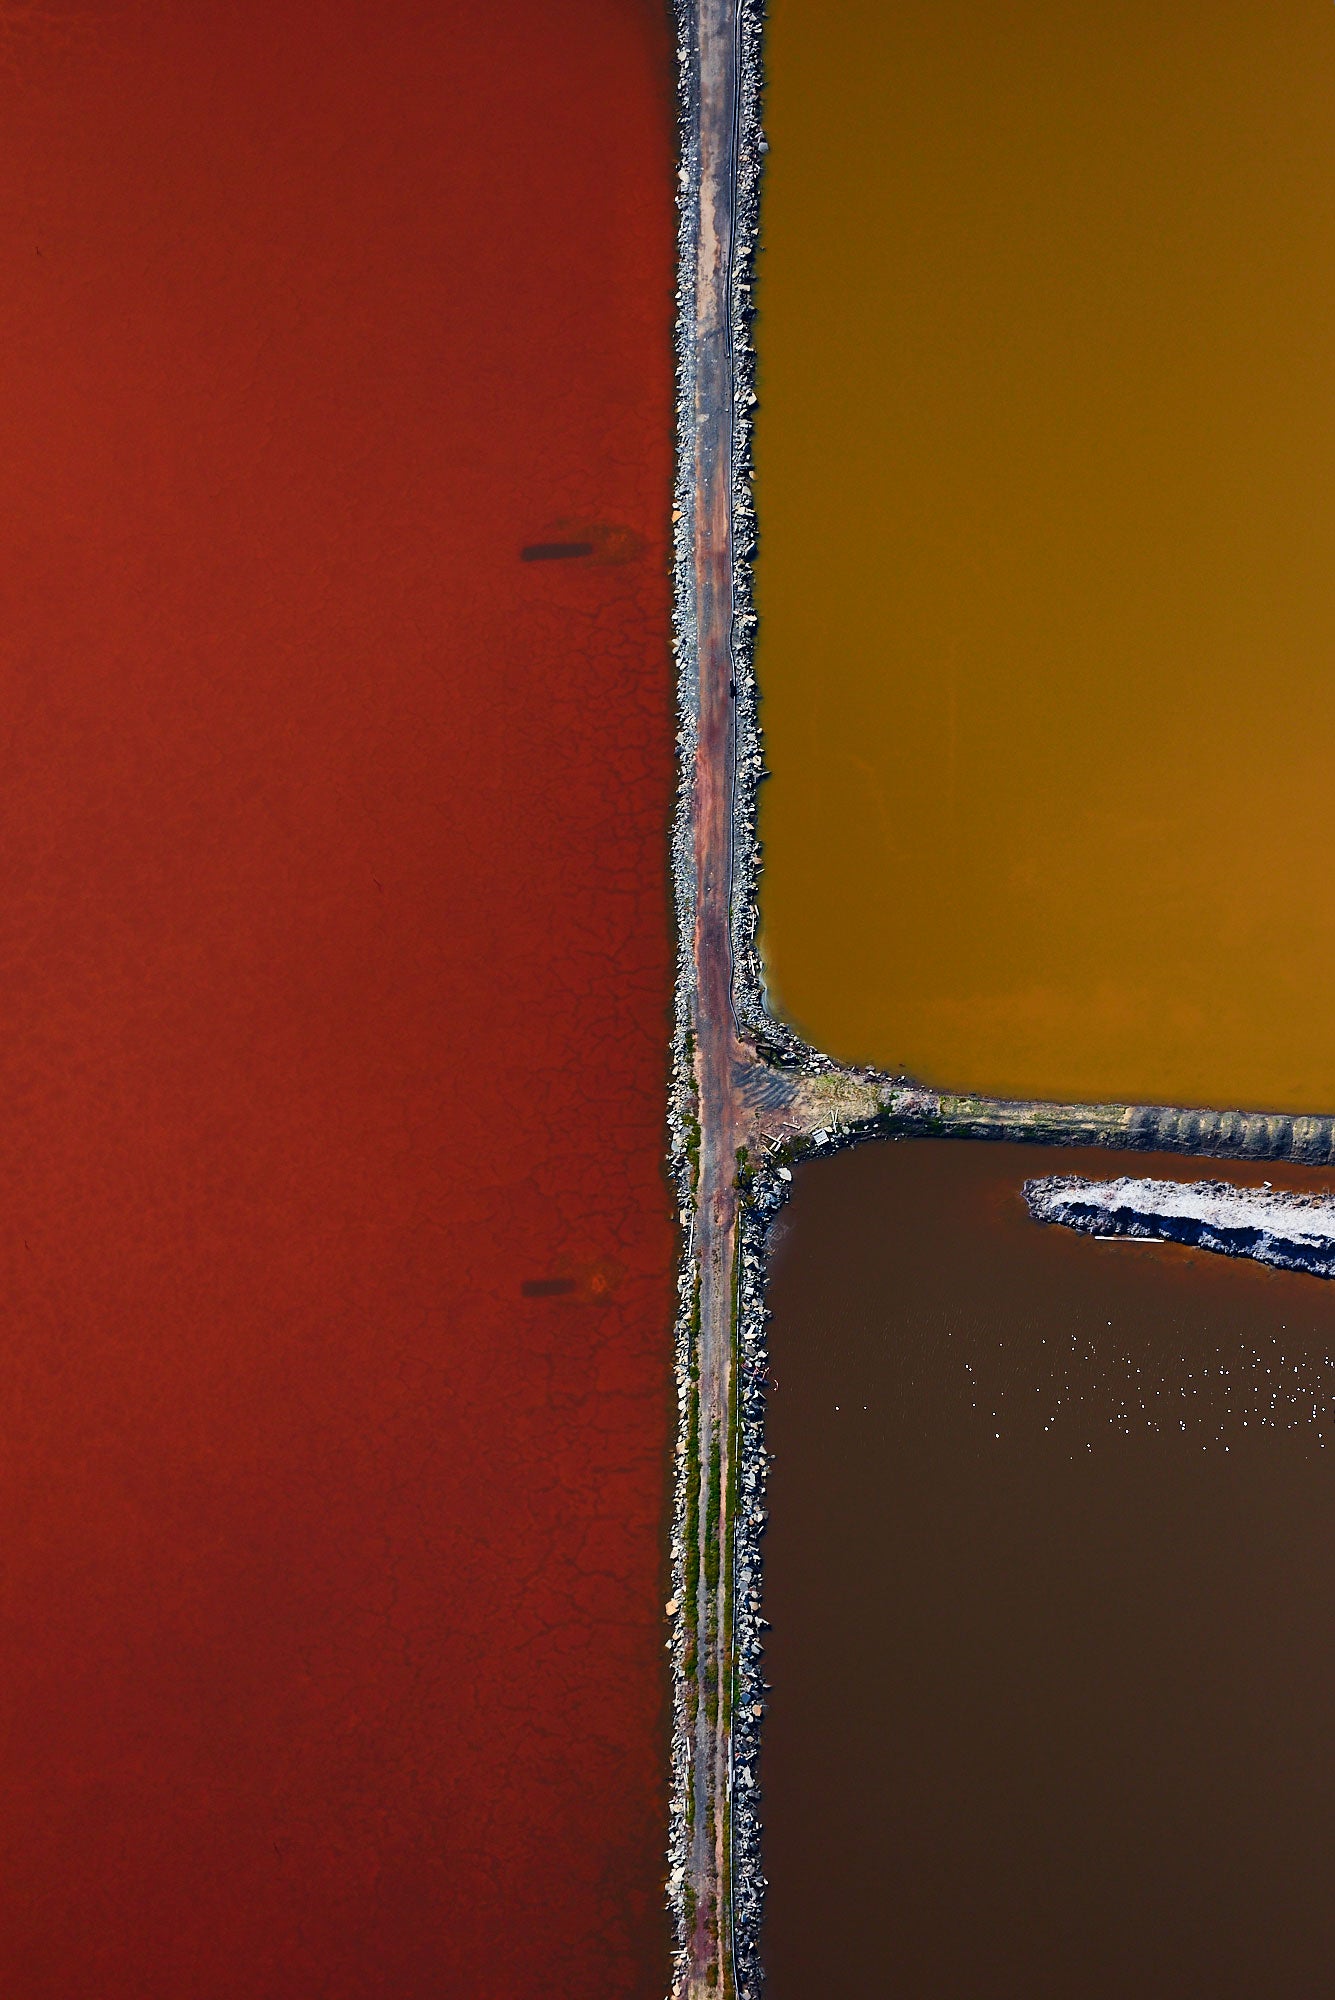 Aerial photography from a doorless R22 helicopter over the San Francisco Bay Cargill Salt Ponds. Limited & open edition fine art prints available for purchase. 